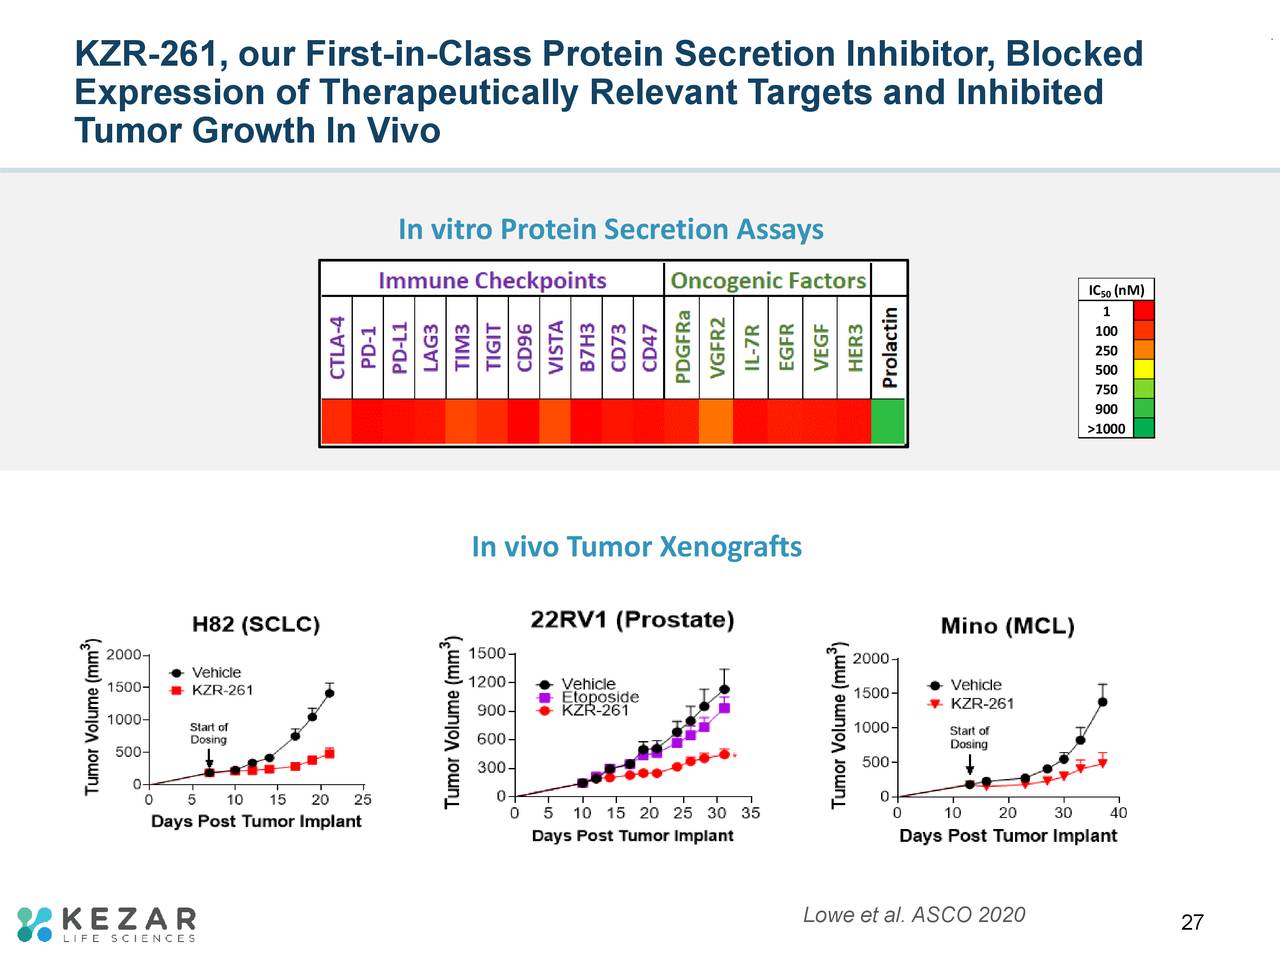 KZR-261, our First-in-Class Protein Secretion Inhibitor, Blocked